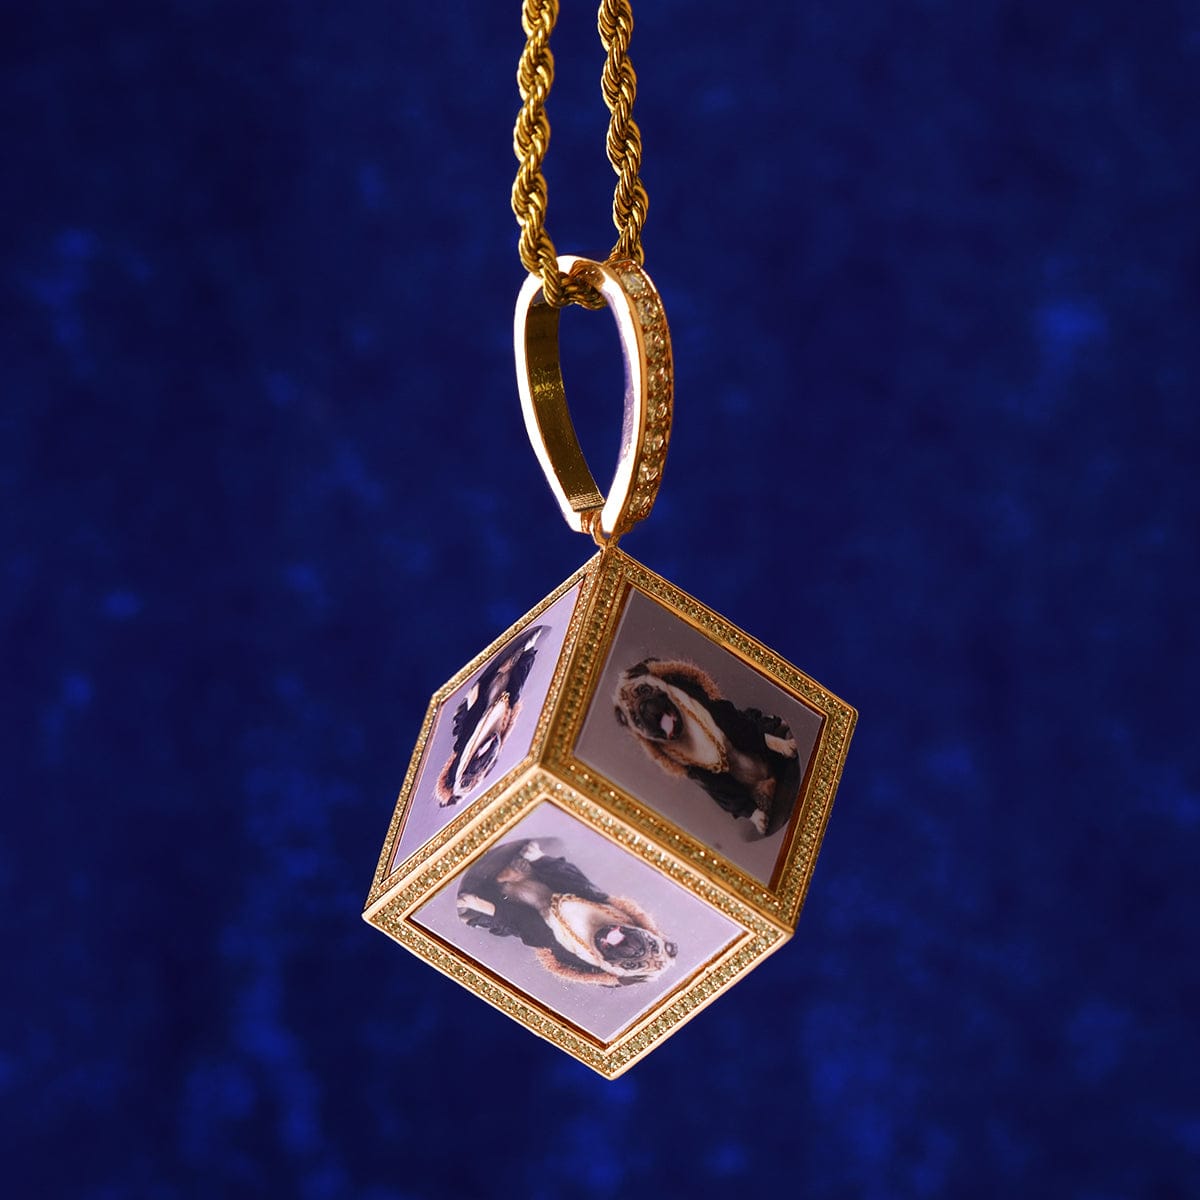 VVS Jewelry hip hop jewelry Gold / Rope Chain / 16inch Custom Iced Out 3D Dice Photo Pendant